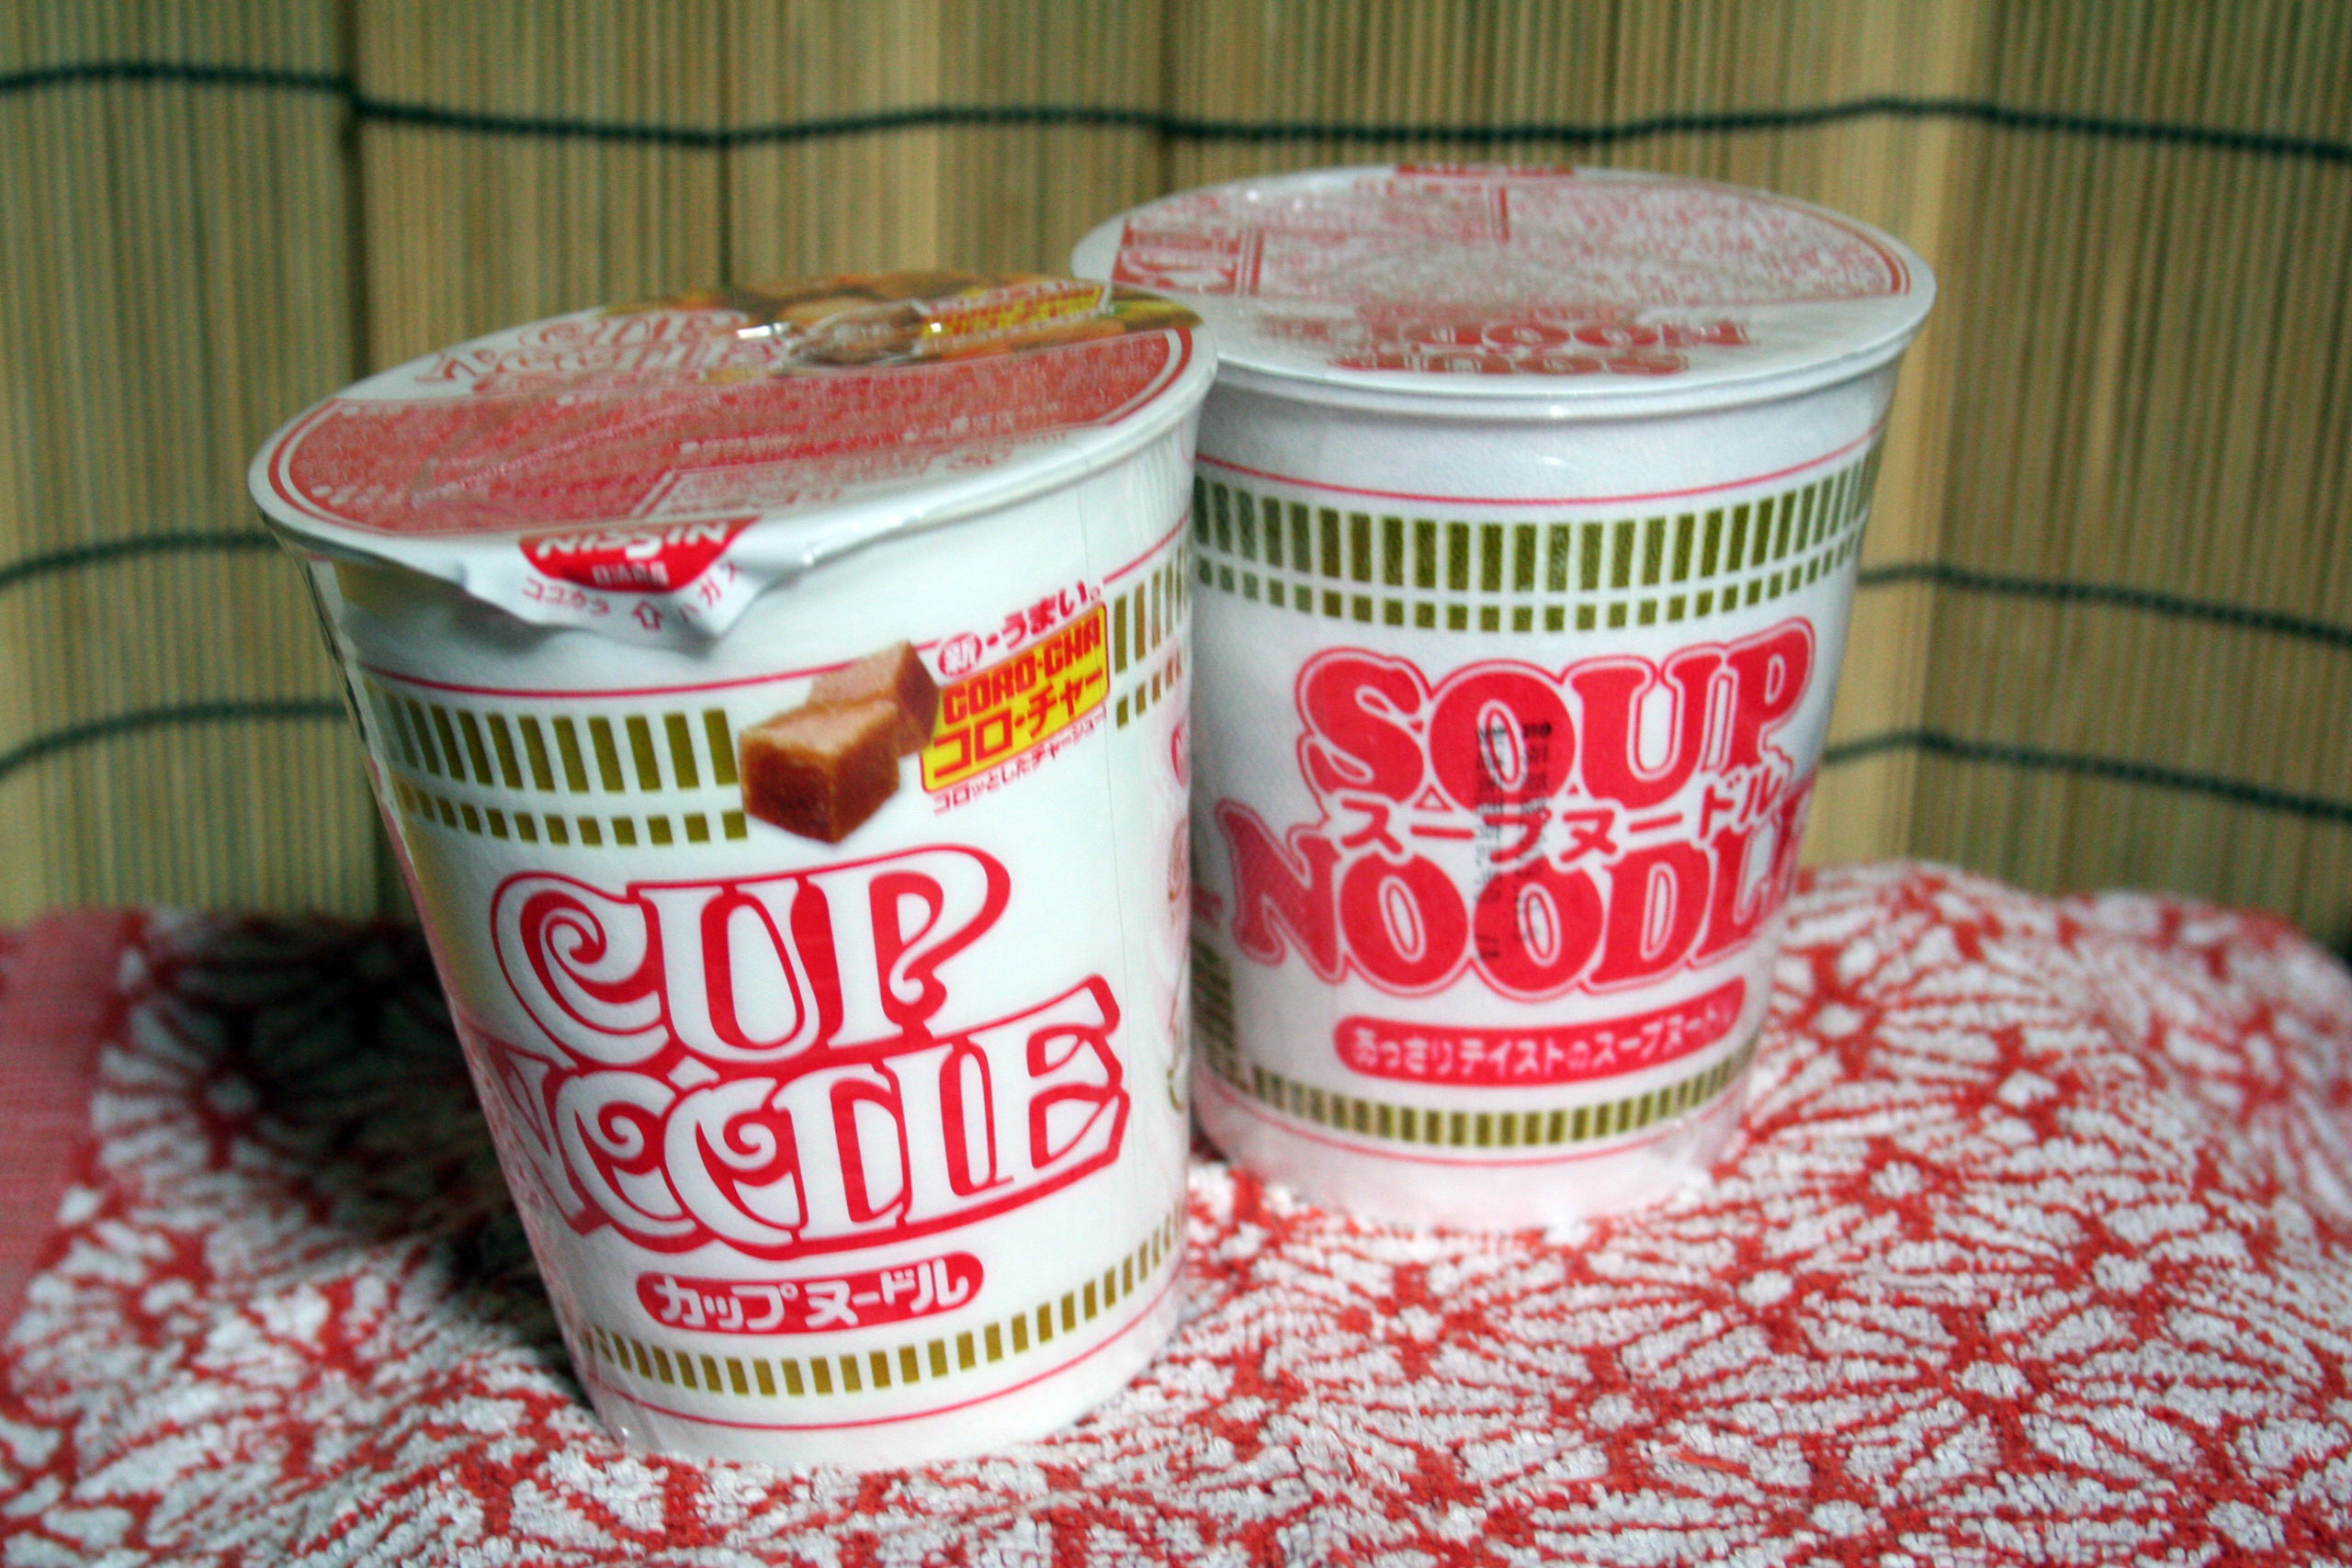 Cup Noodles Soup Soda Is Now a Thing That Exists After Cup Noodle’s 50th Anniversary!